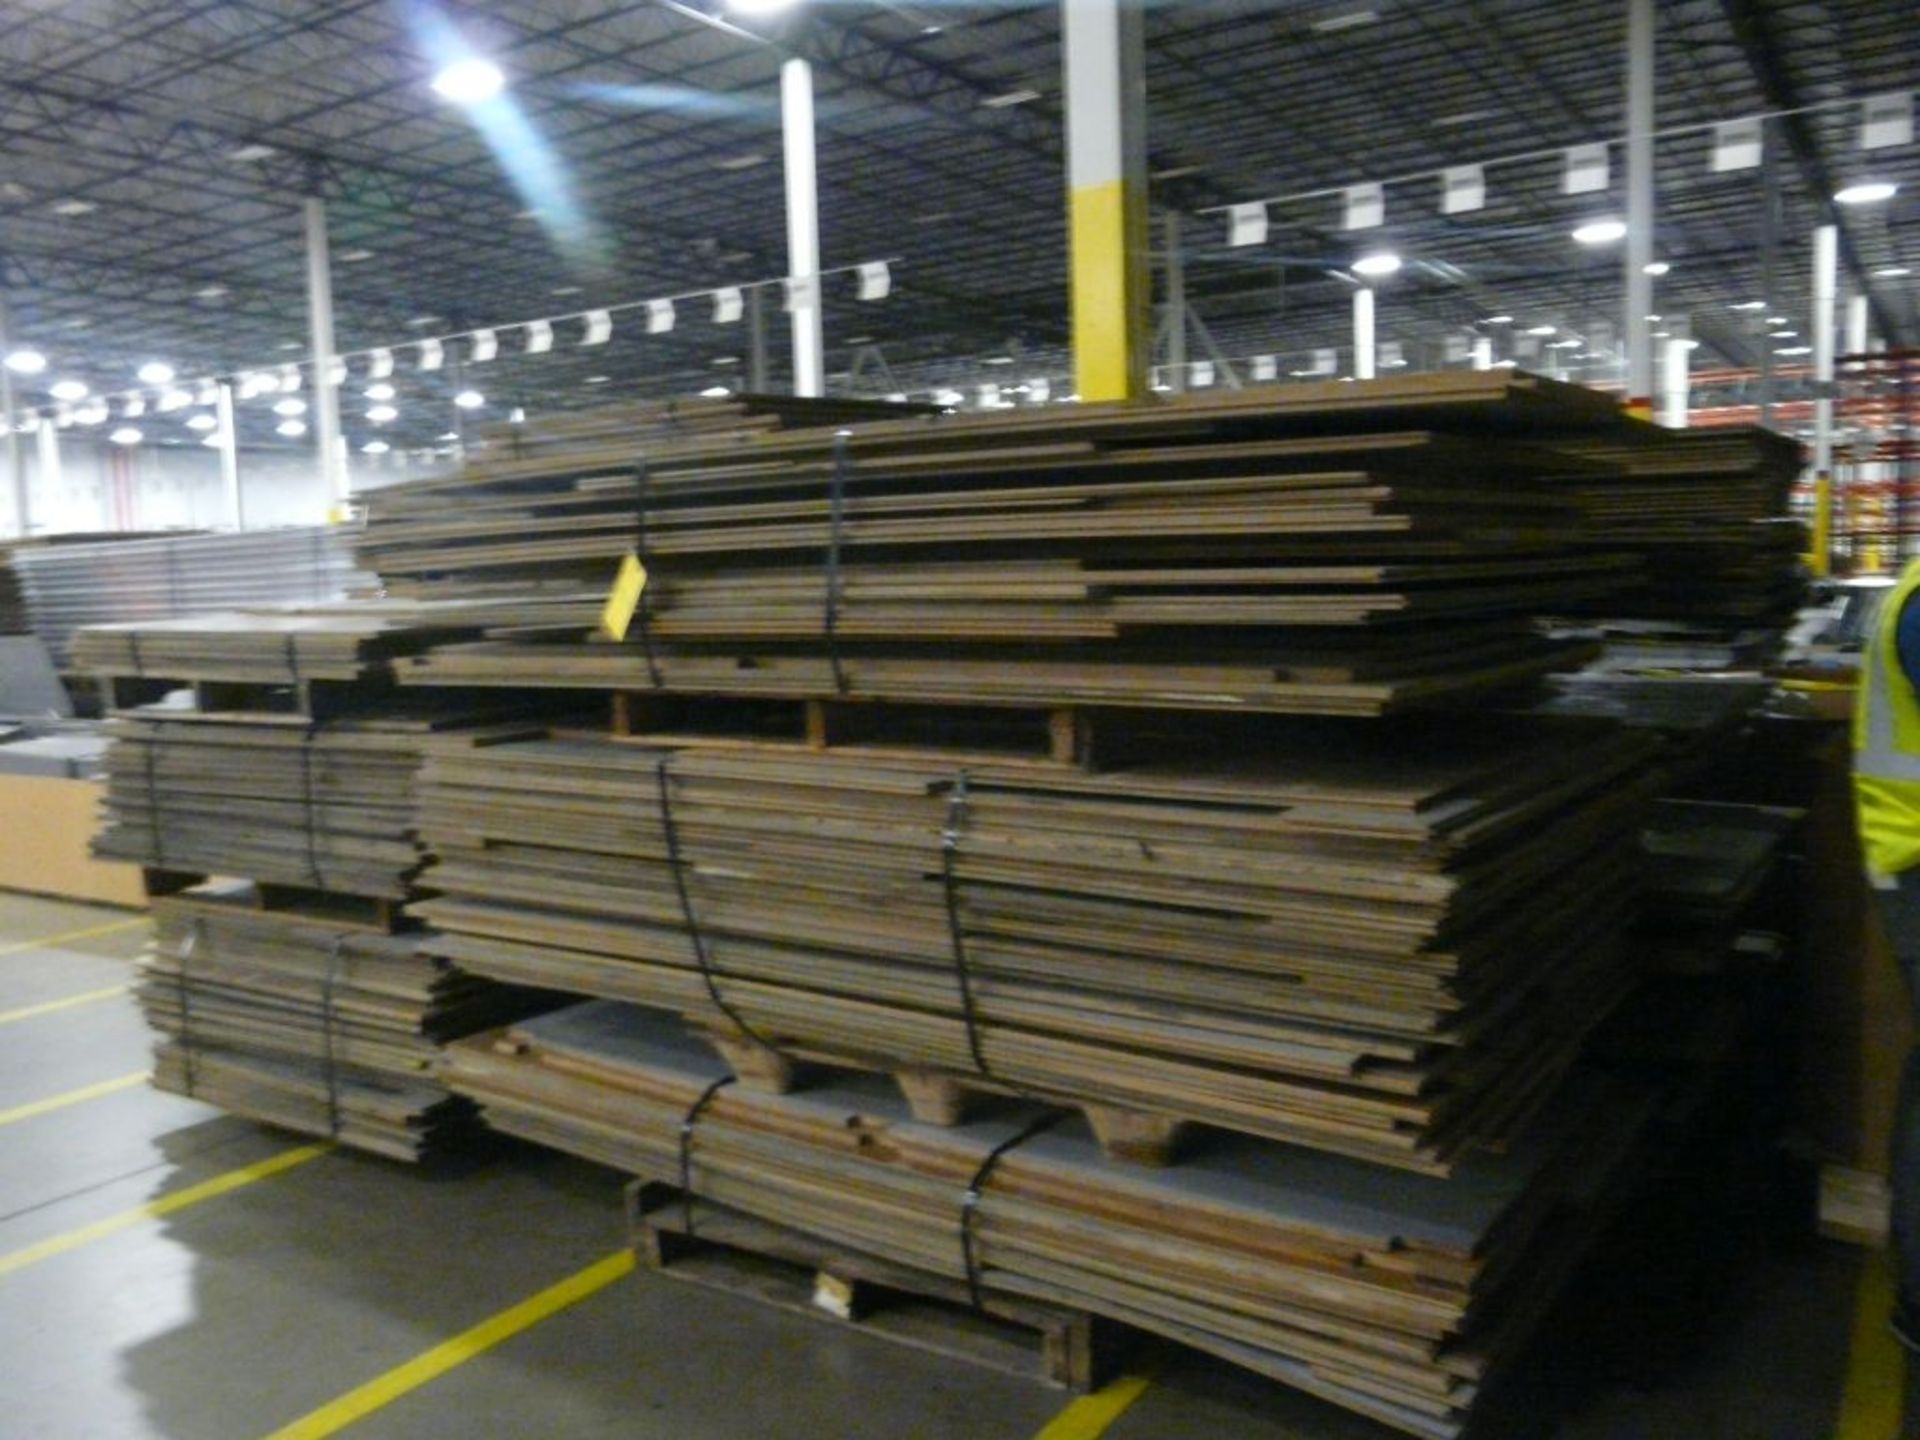 Lot of (1) Bundles of (30) Wood Floor Boards - 101" x 48"W; Tag: 223817 - $30 Lot Loading Fee - Image 2 of 3